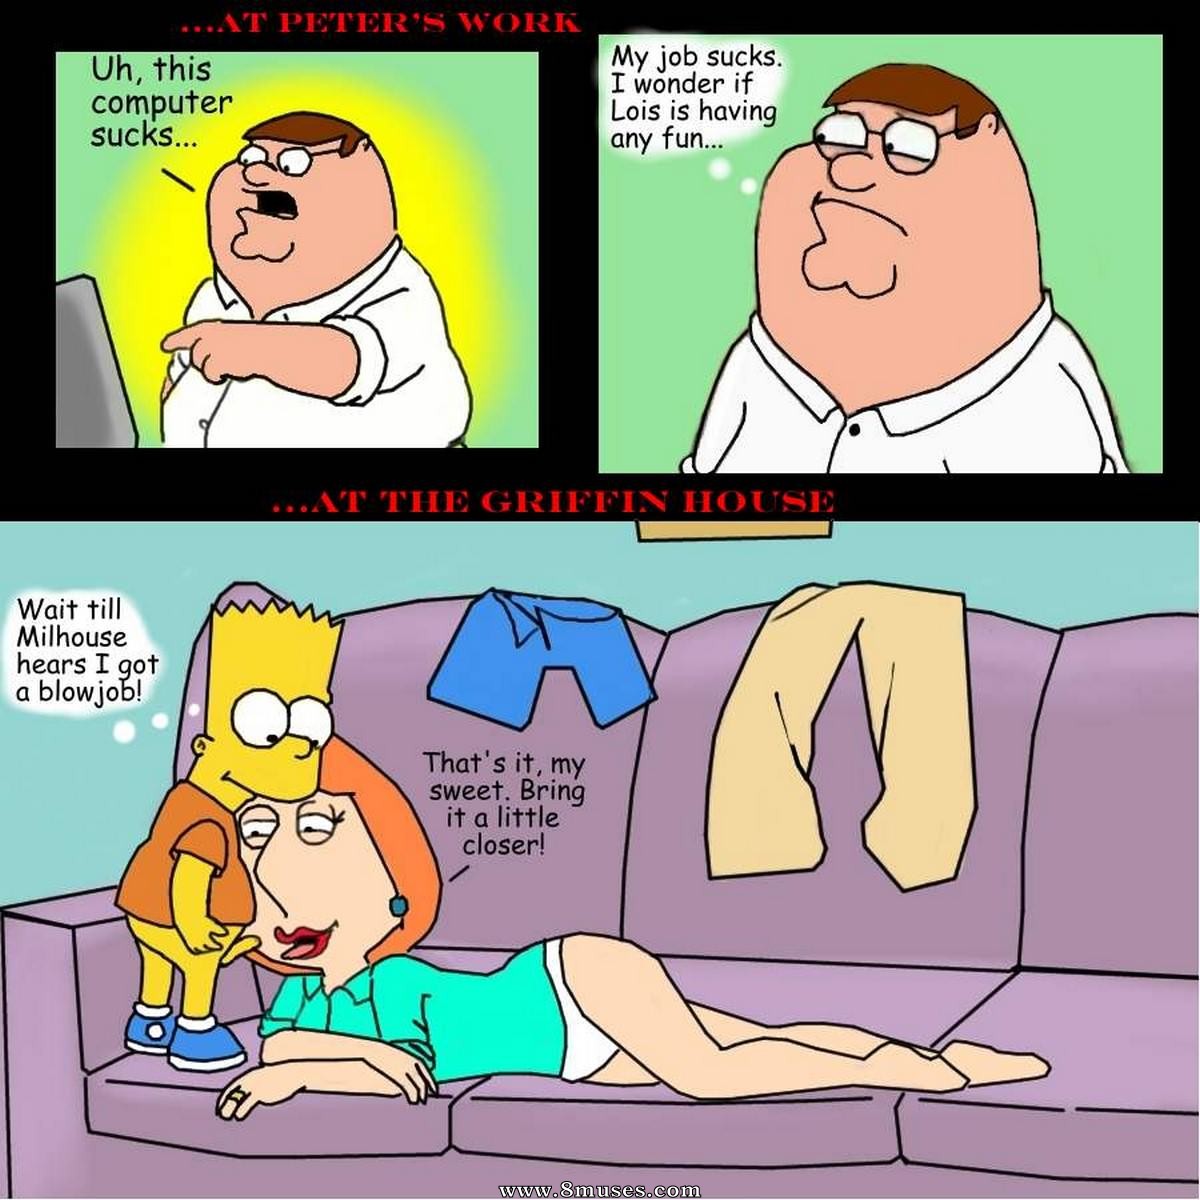 Family Guy Lois Porn Comic Strip - Family Guy Bart simpson and Lois Griffin fucking Issue 1 - 8muses Comics -  Sex Comics and Porn Cartoons